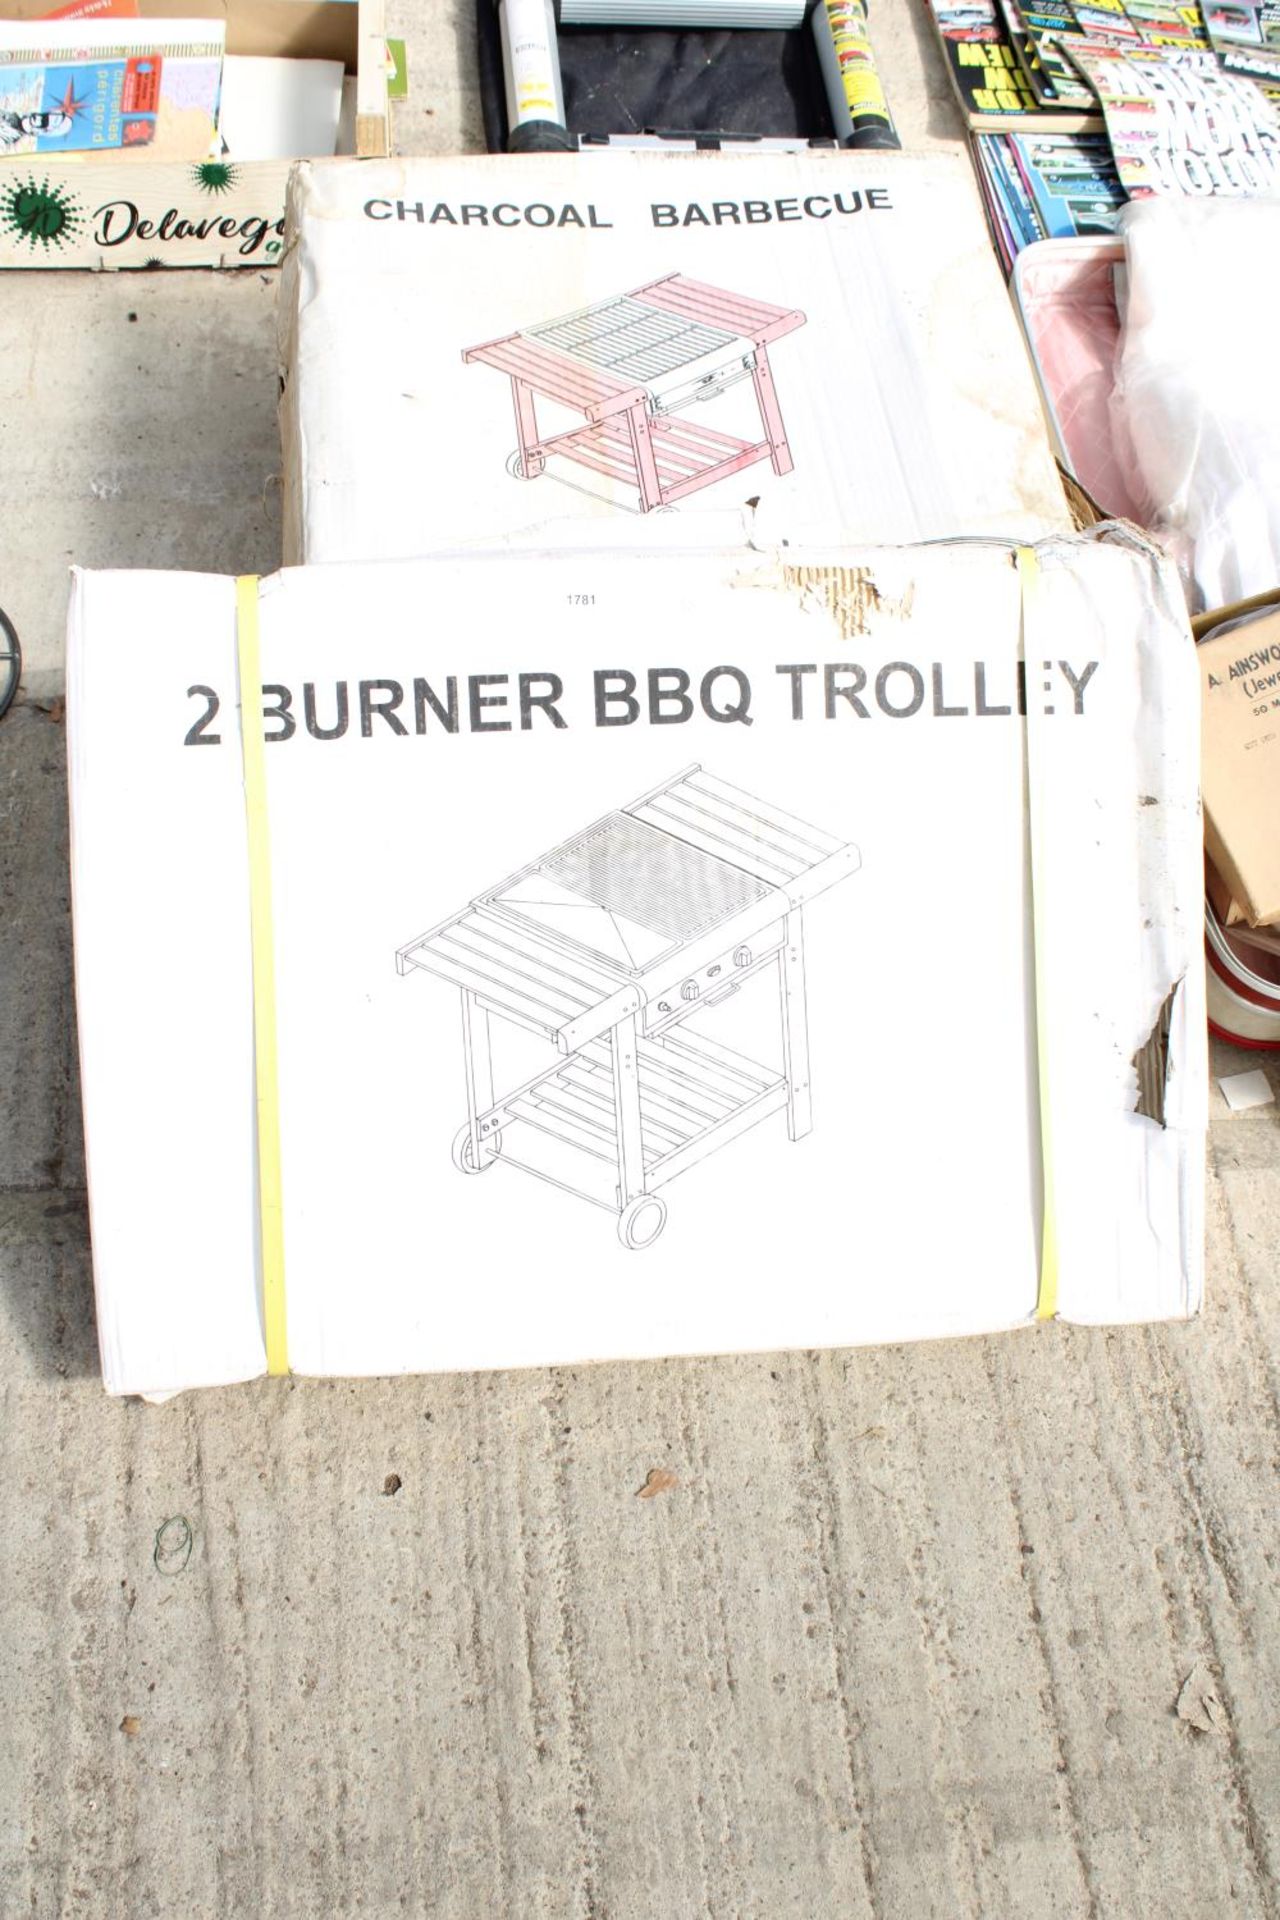 A NEW AND BOXED CHARCOAL BBQ AND A NEW AND BOXED TWO BURNER BBQ TROLLEY (BOXES WATER DAMAGED)